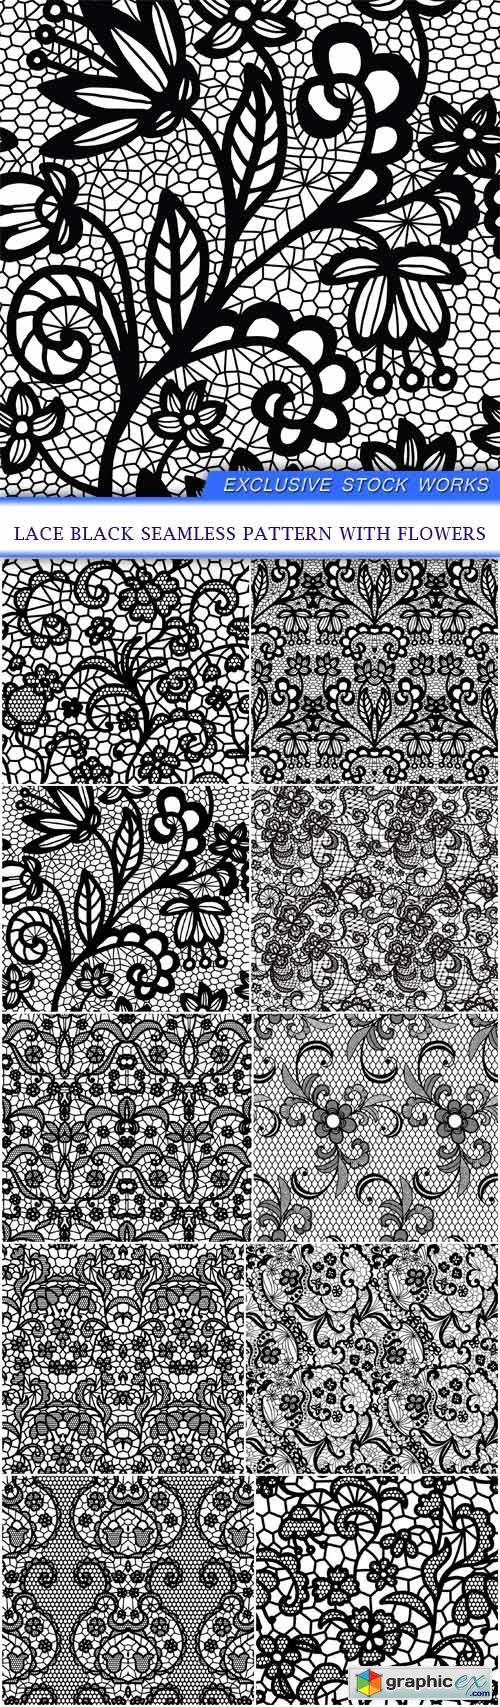 Lace black seamless pattern with flowers 10X EPS